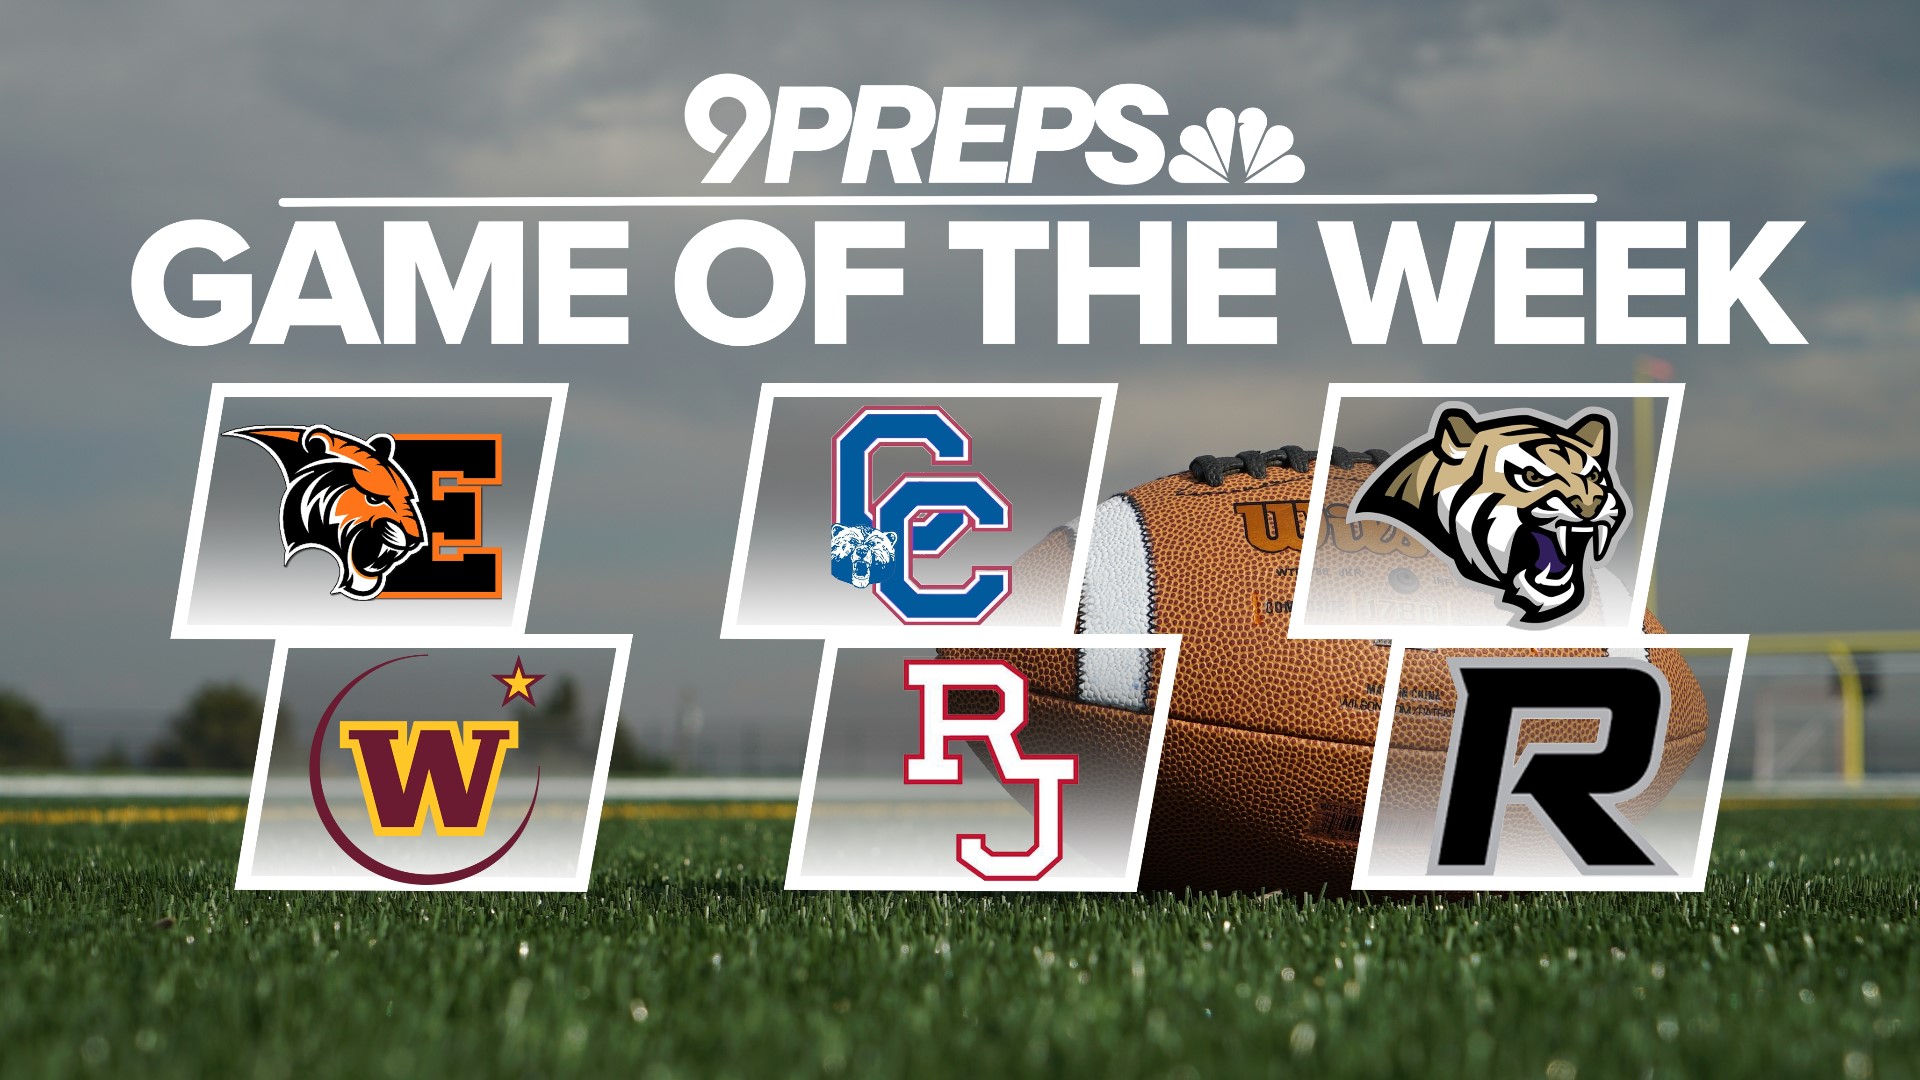 The 9Preps Game of the Week rolls on! Vote to determine which high school football game we showcase on Friday, Sept. 22.